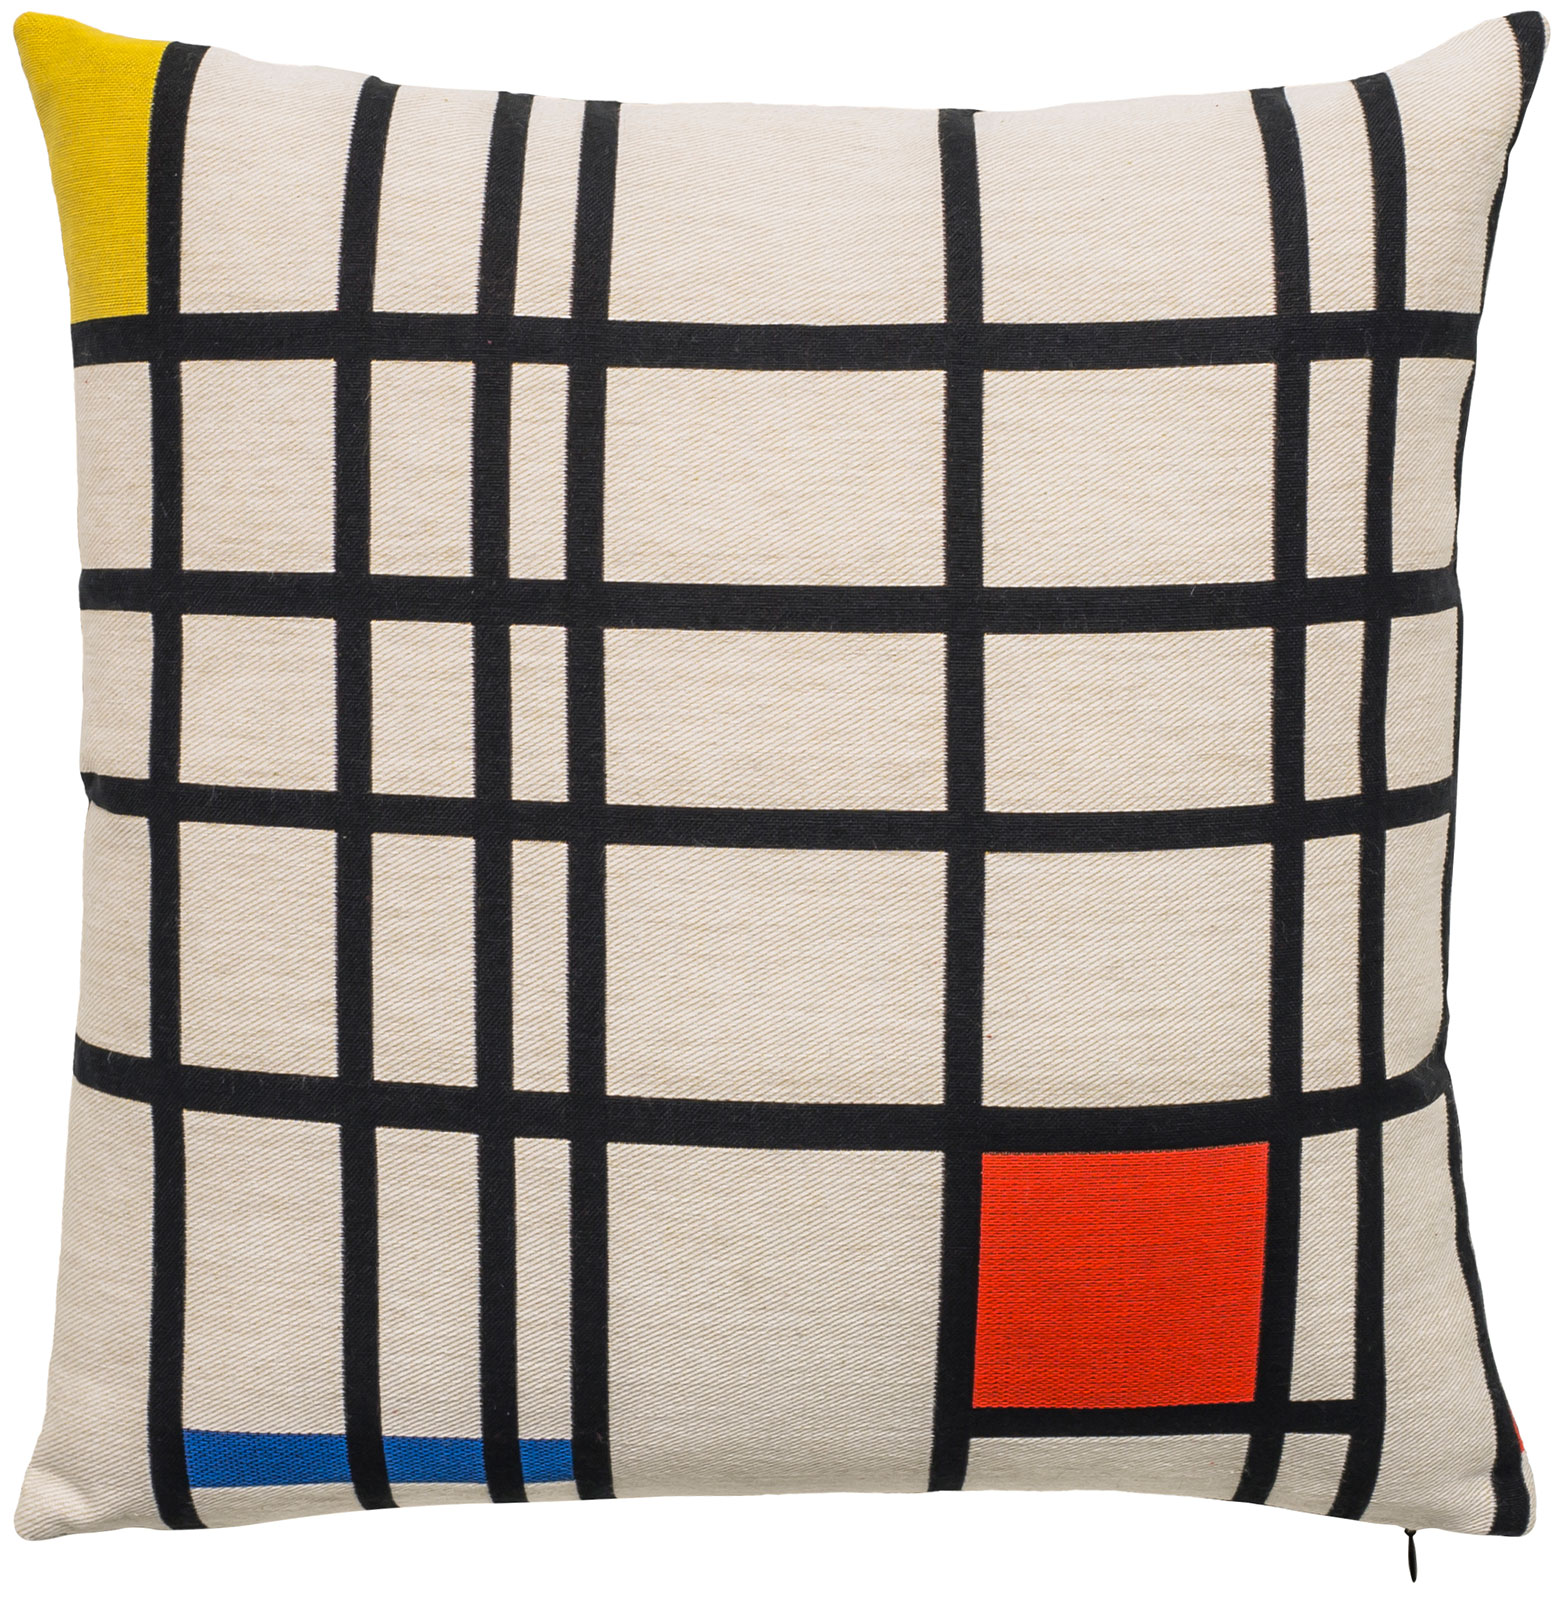 Cushion cover "Composition in Red, Blue and Yellow" by Piet Mondrian